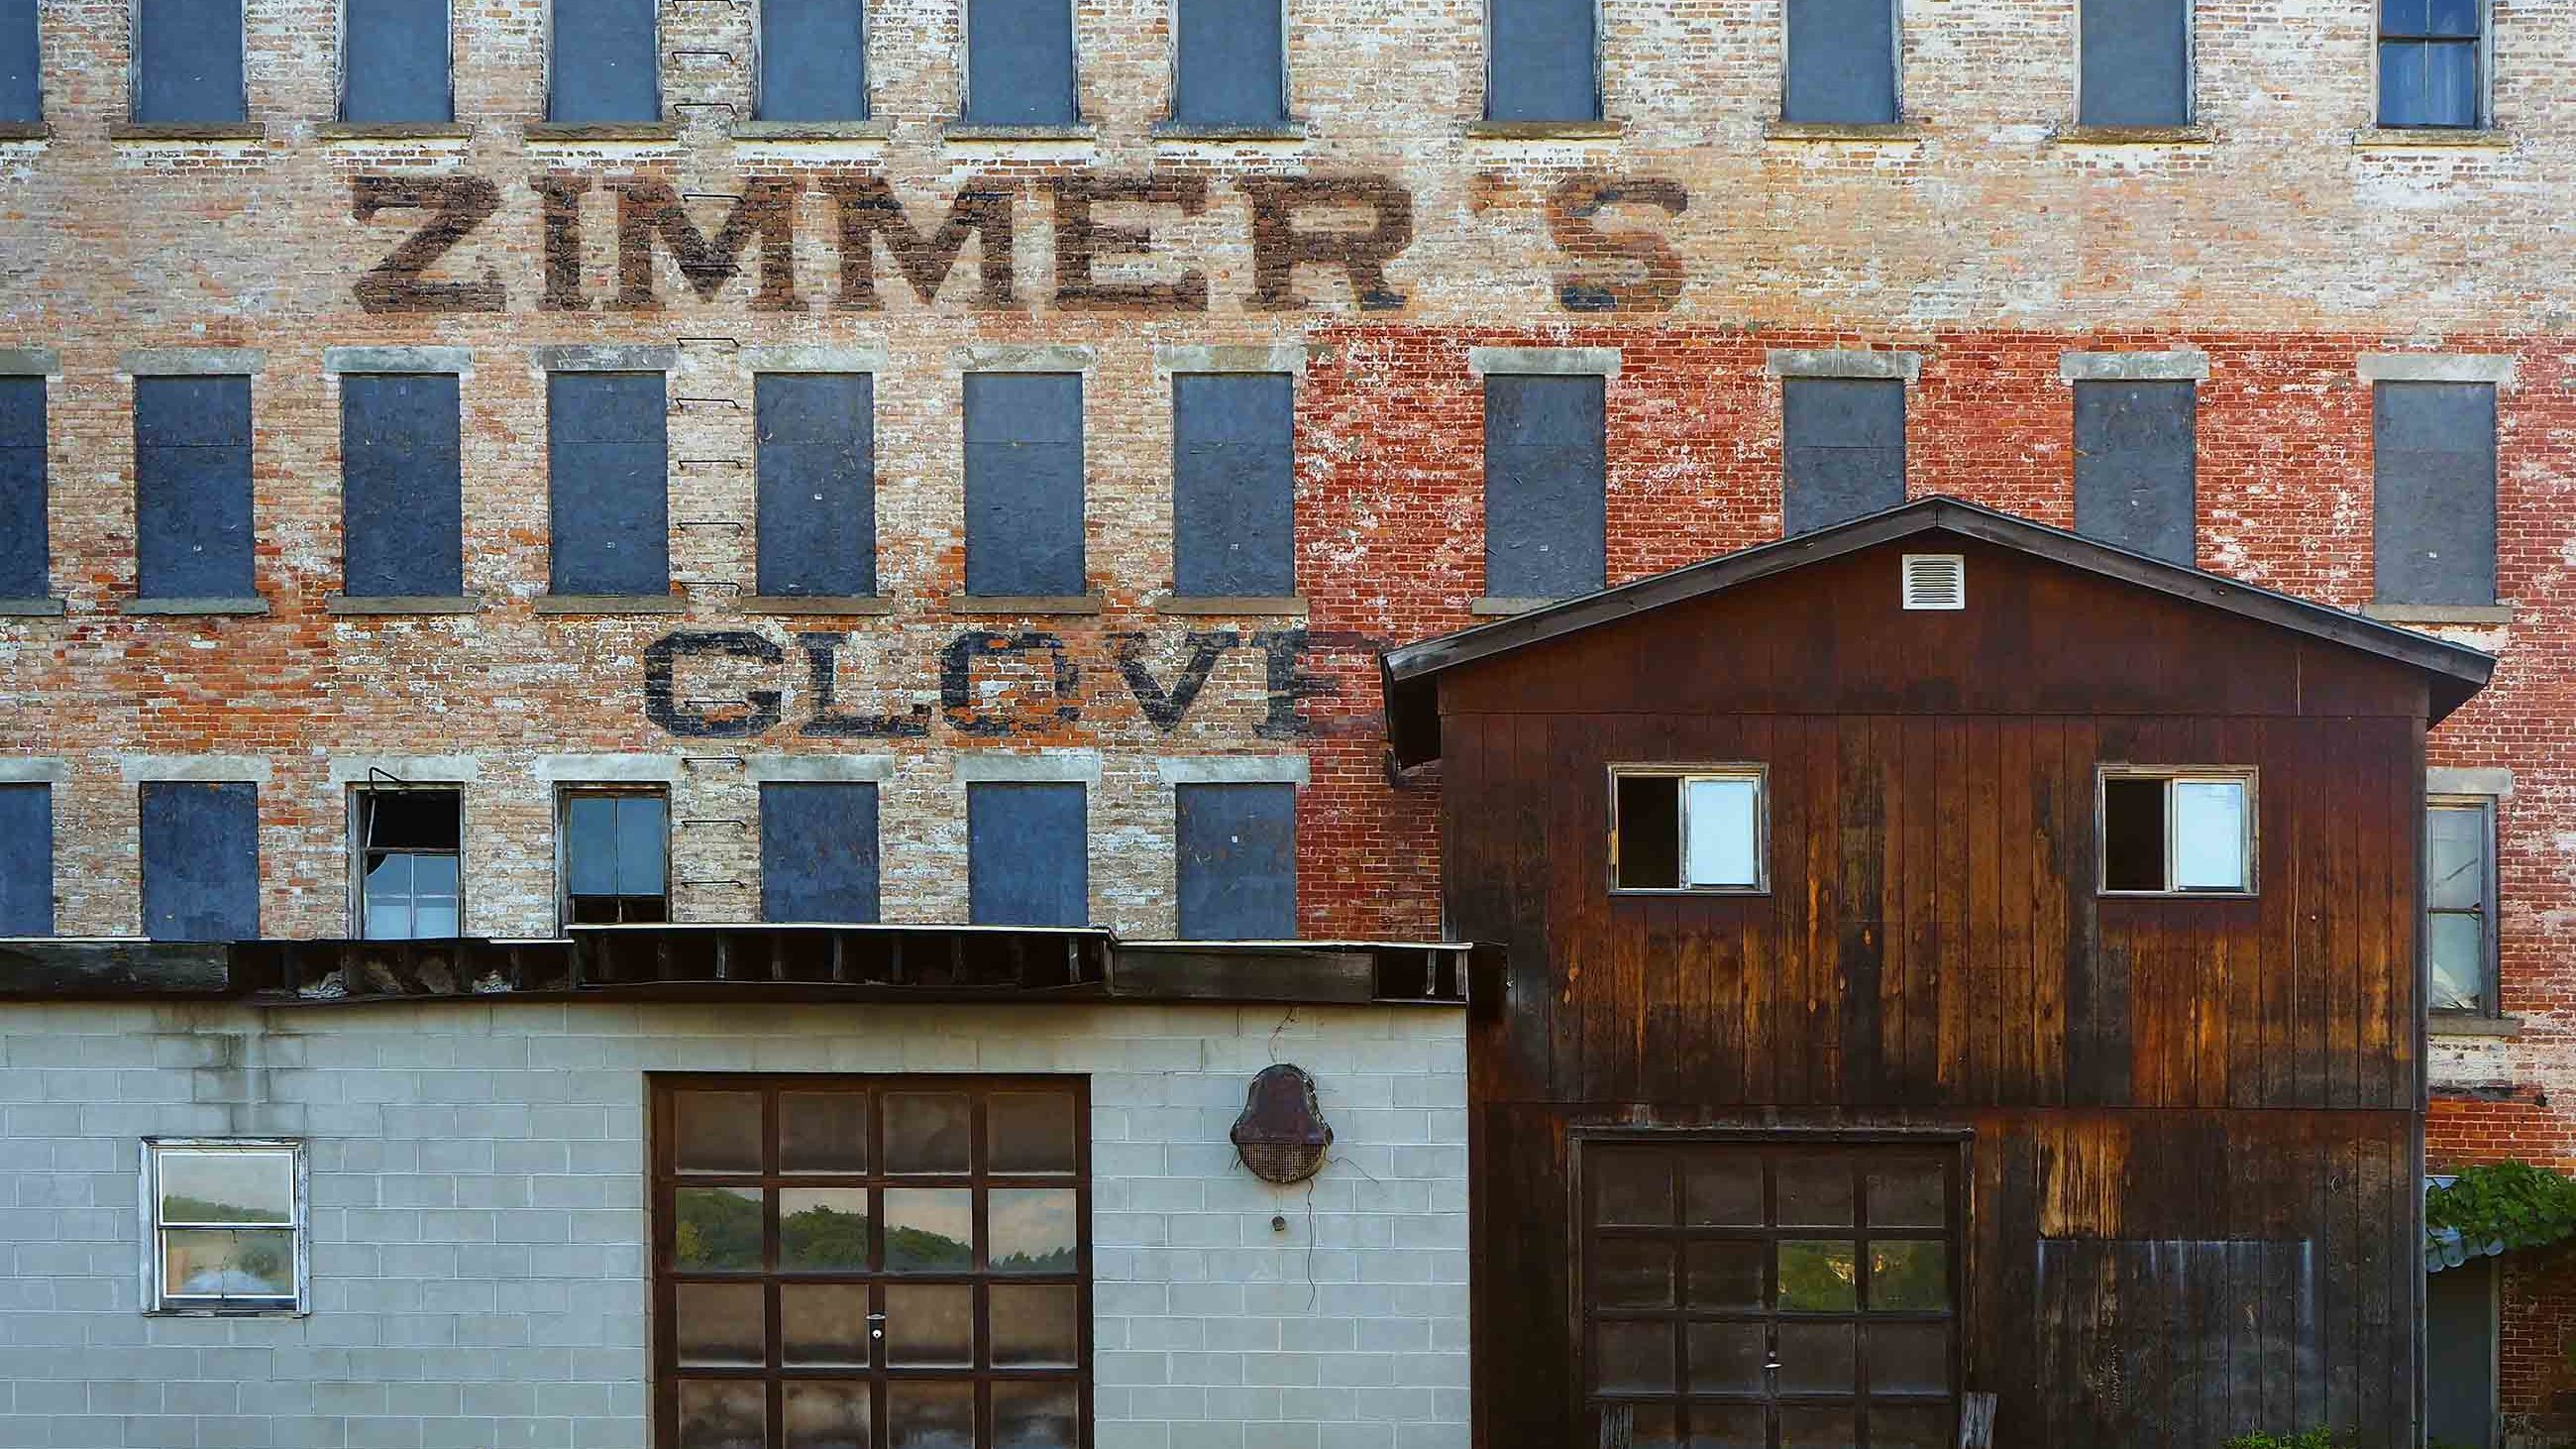 The ruins of the Zimmer and Son glove factory on South Arlington Avenue is a Gloversville, New York, landmark. For more than 100 years, leather tanning and glove making propelled the economy of this upstate New York town.